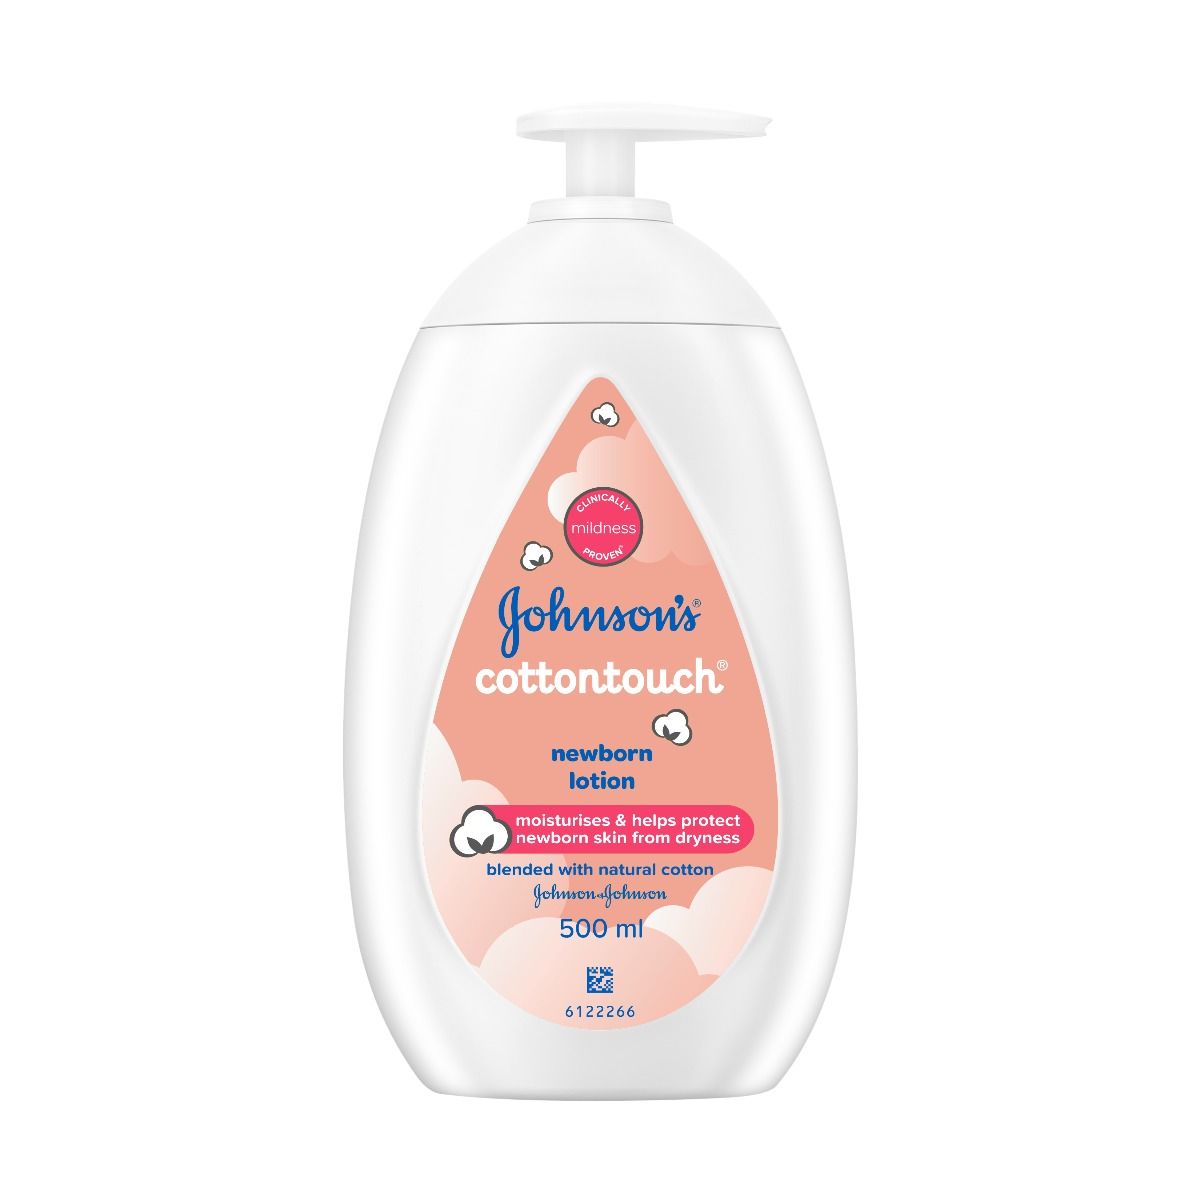 Johnson's Cottontouch New Born Lotion, 500 ml, Pack of 1 